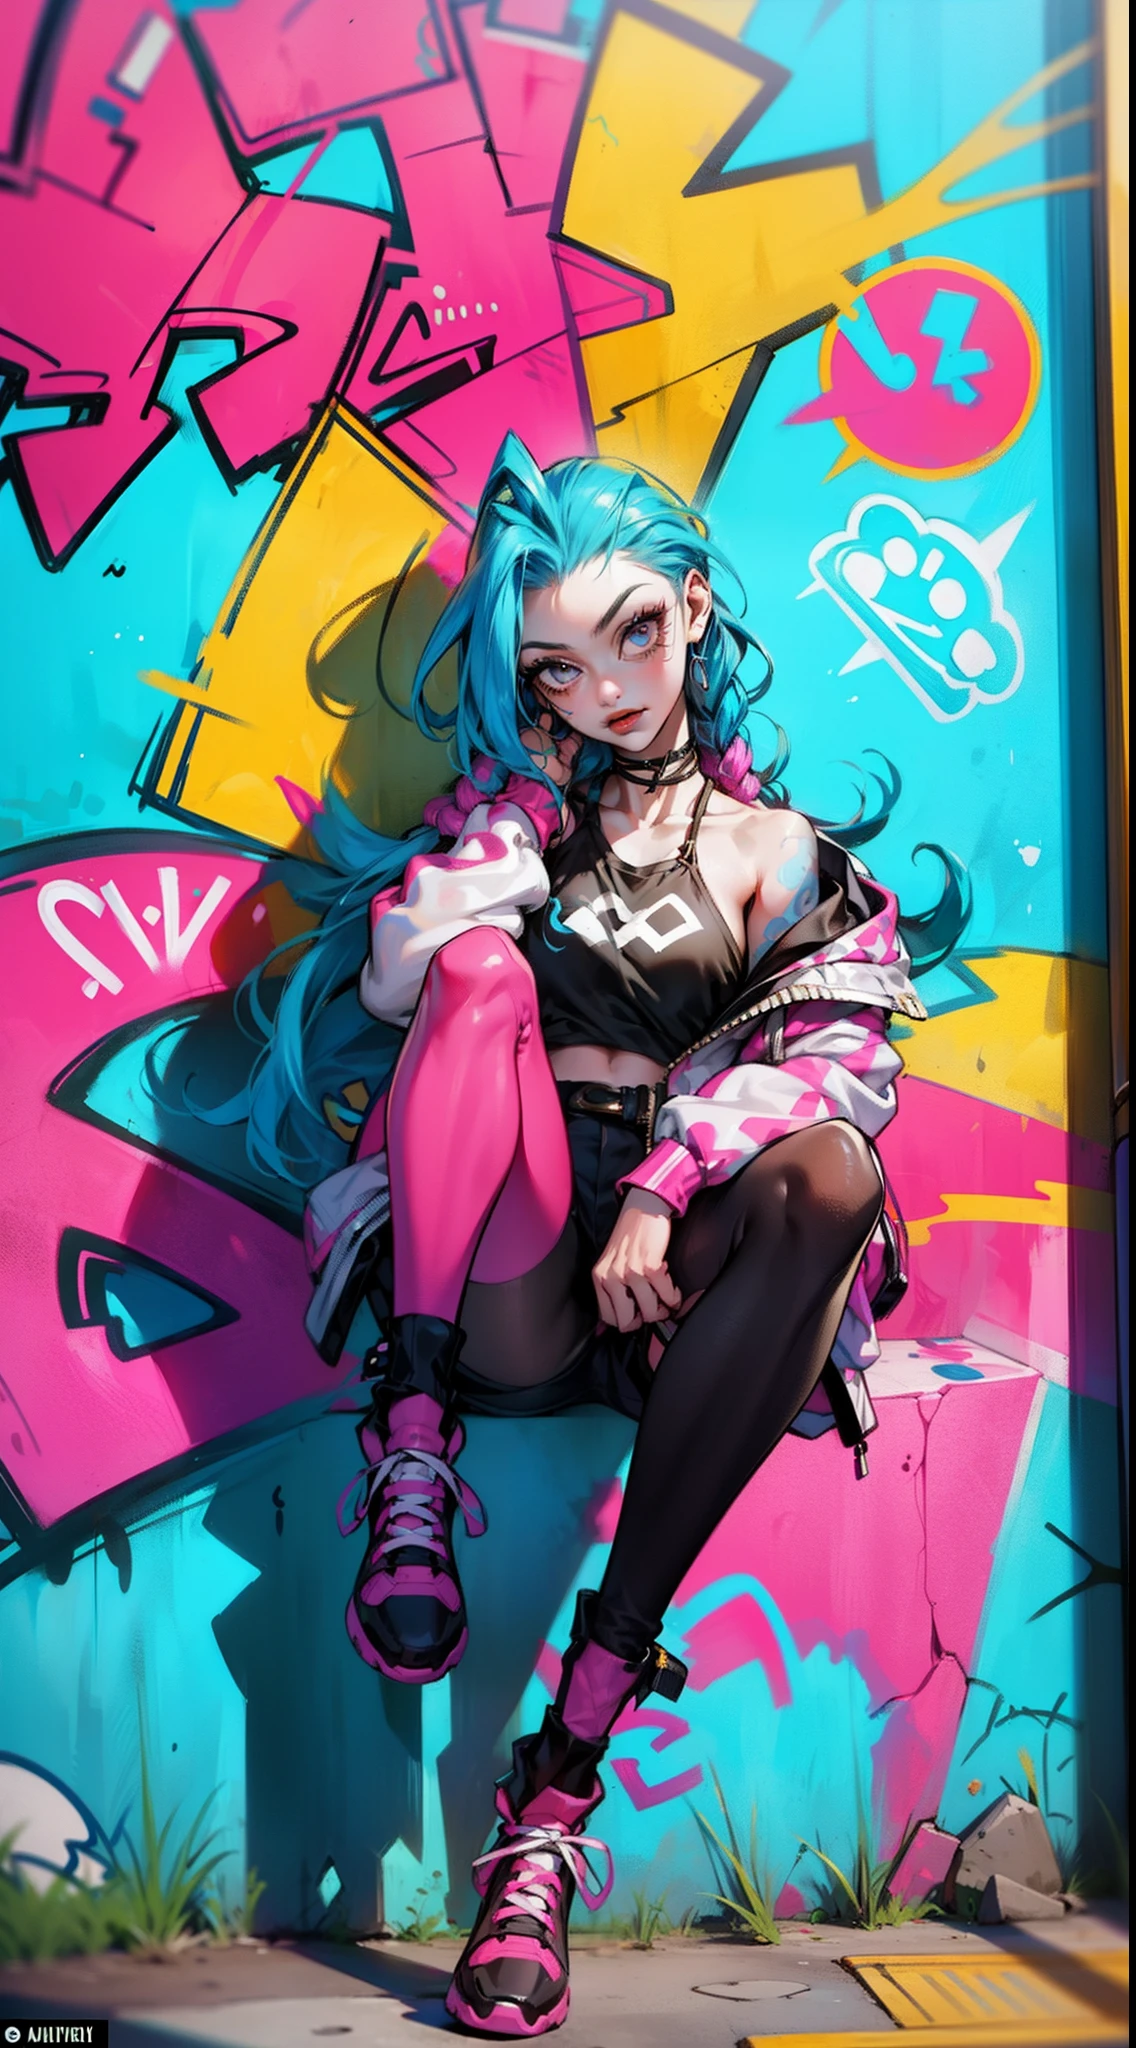 Vibrant graffiti: Adorning the walls surrounding Jinx, vibrant graffiti depicts her misadventures, adding a touch of urban artistry to the scene.